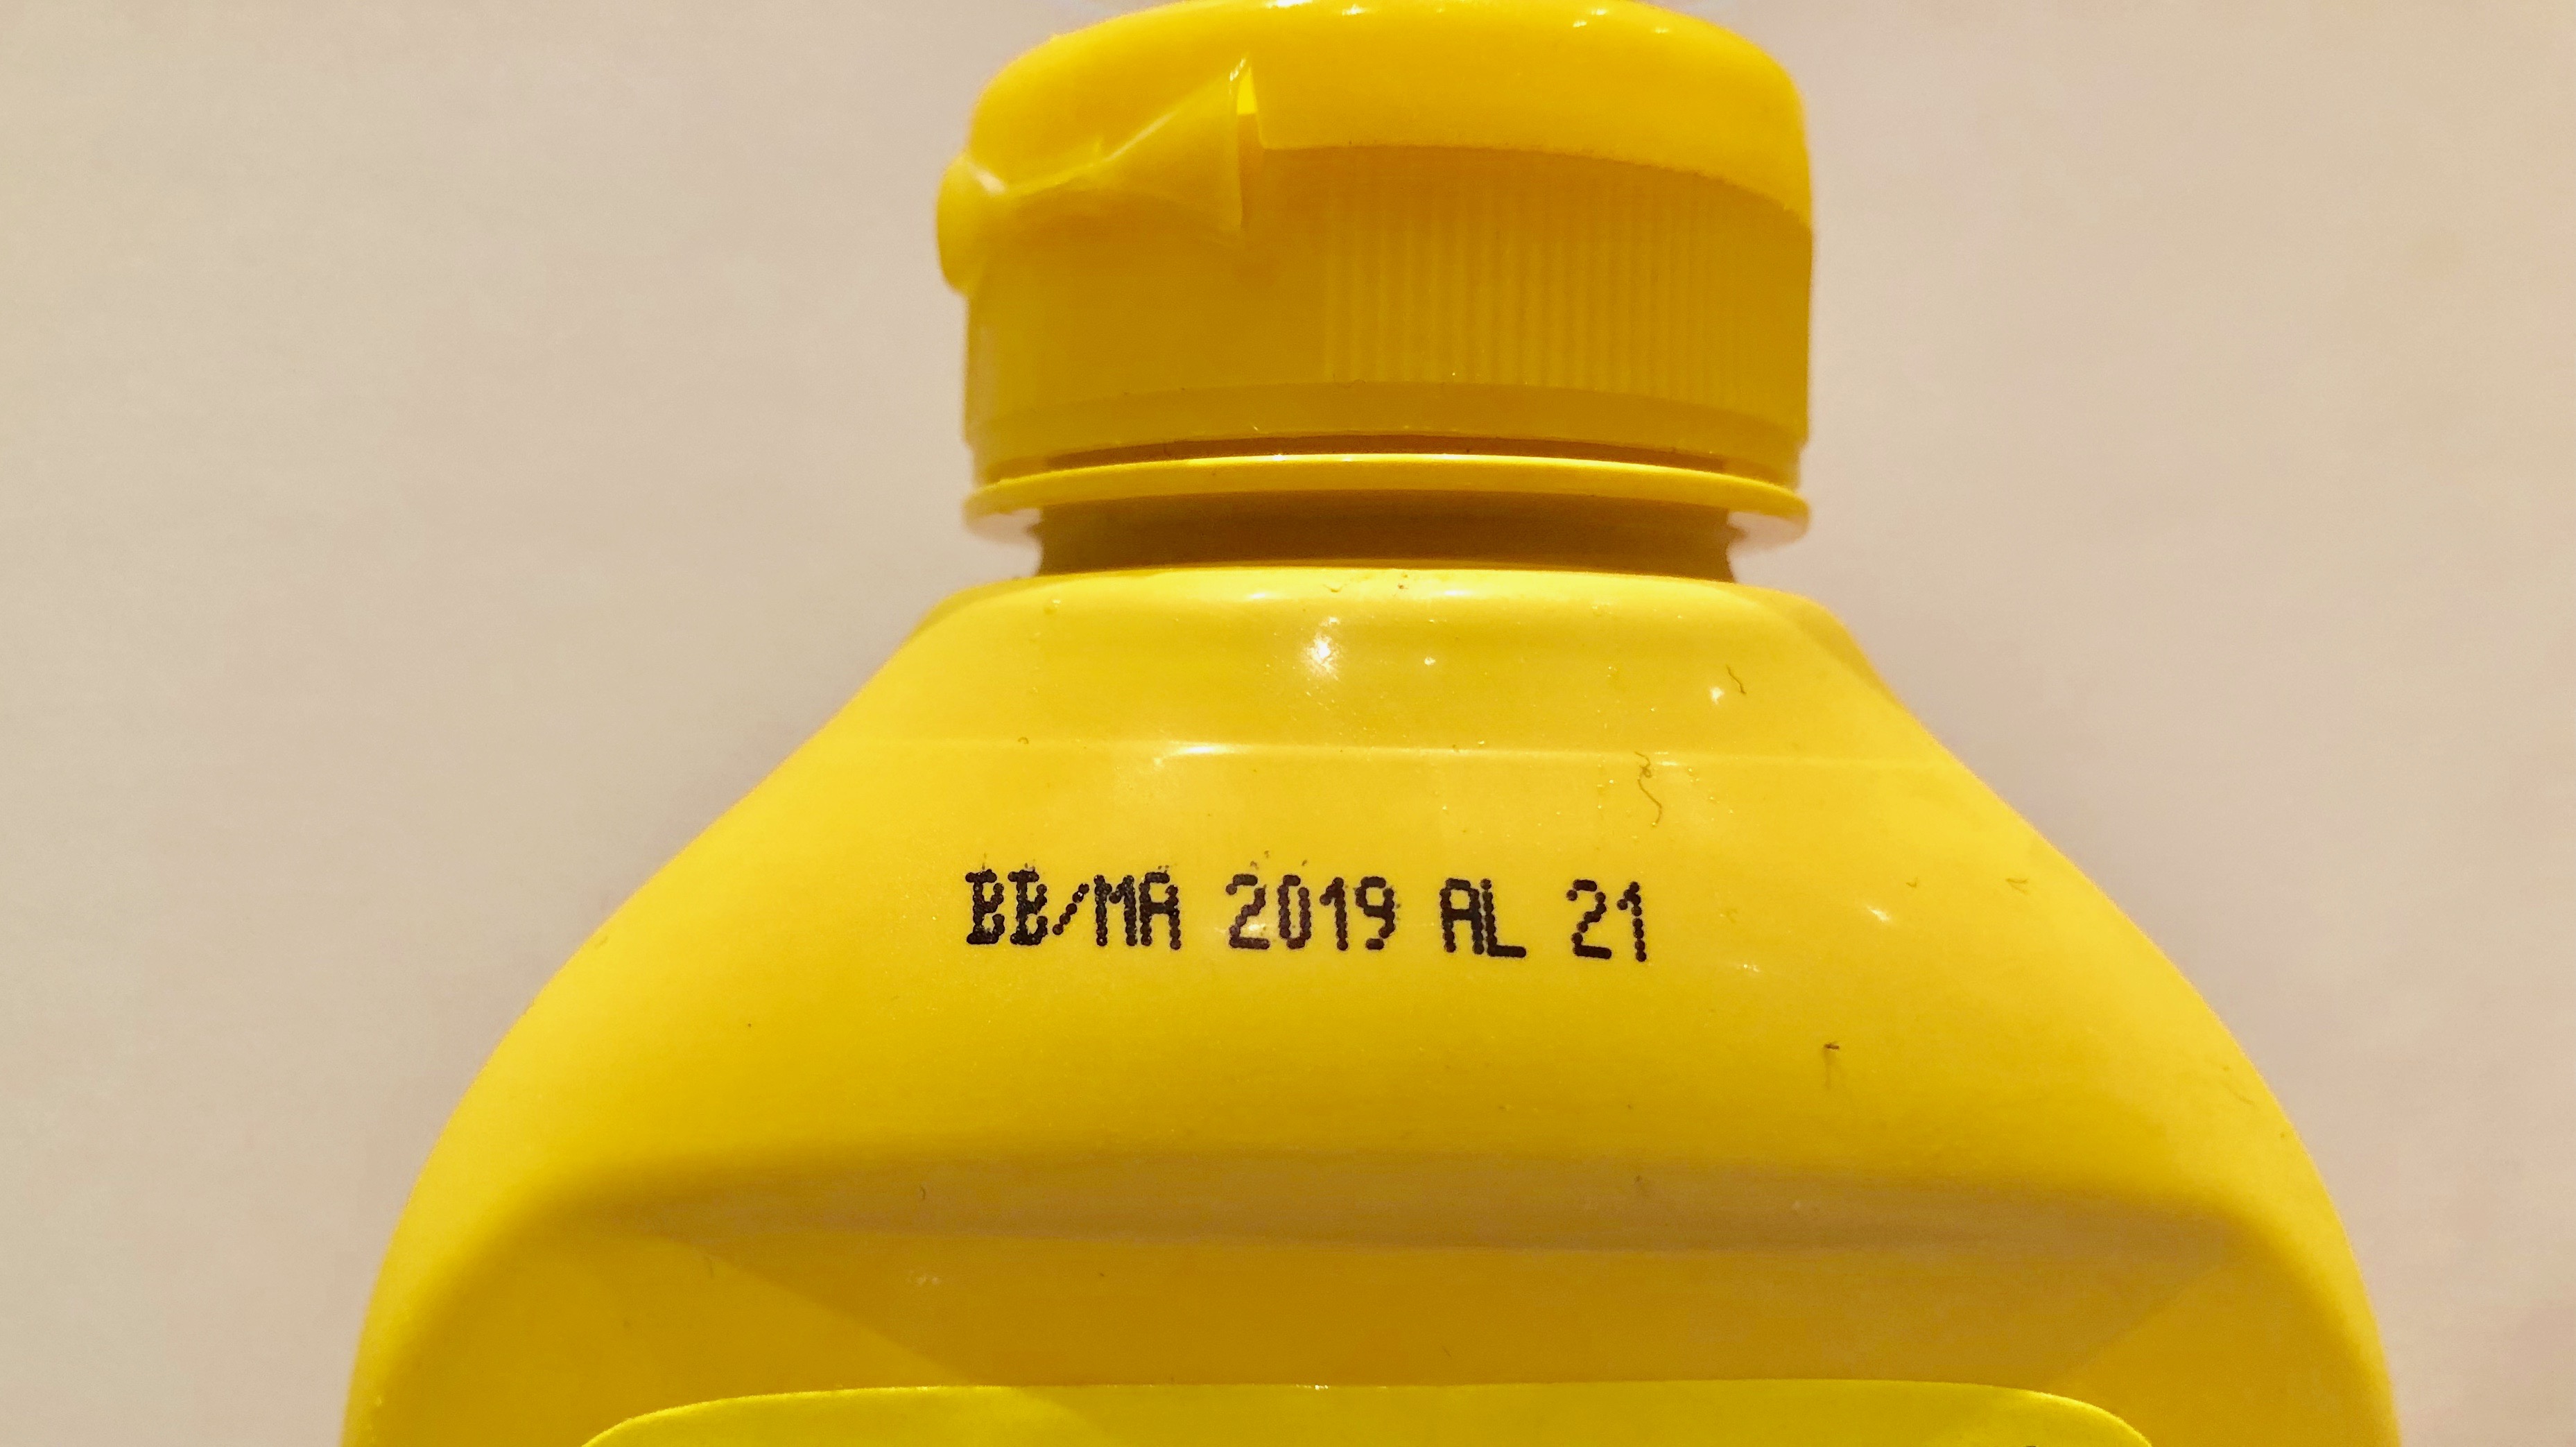 Best before date on the side of a mustard container stating BB/MA 2019 AL 21